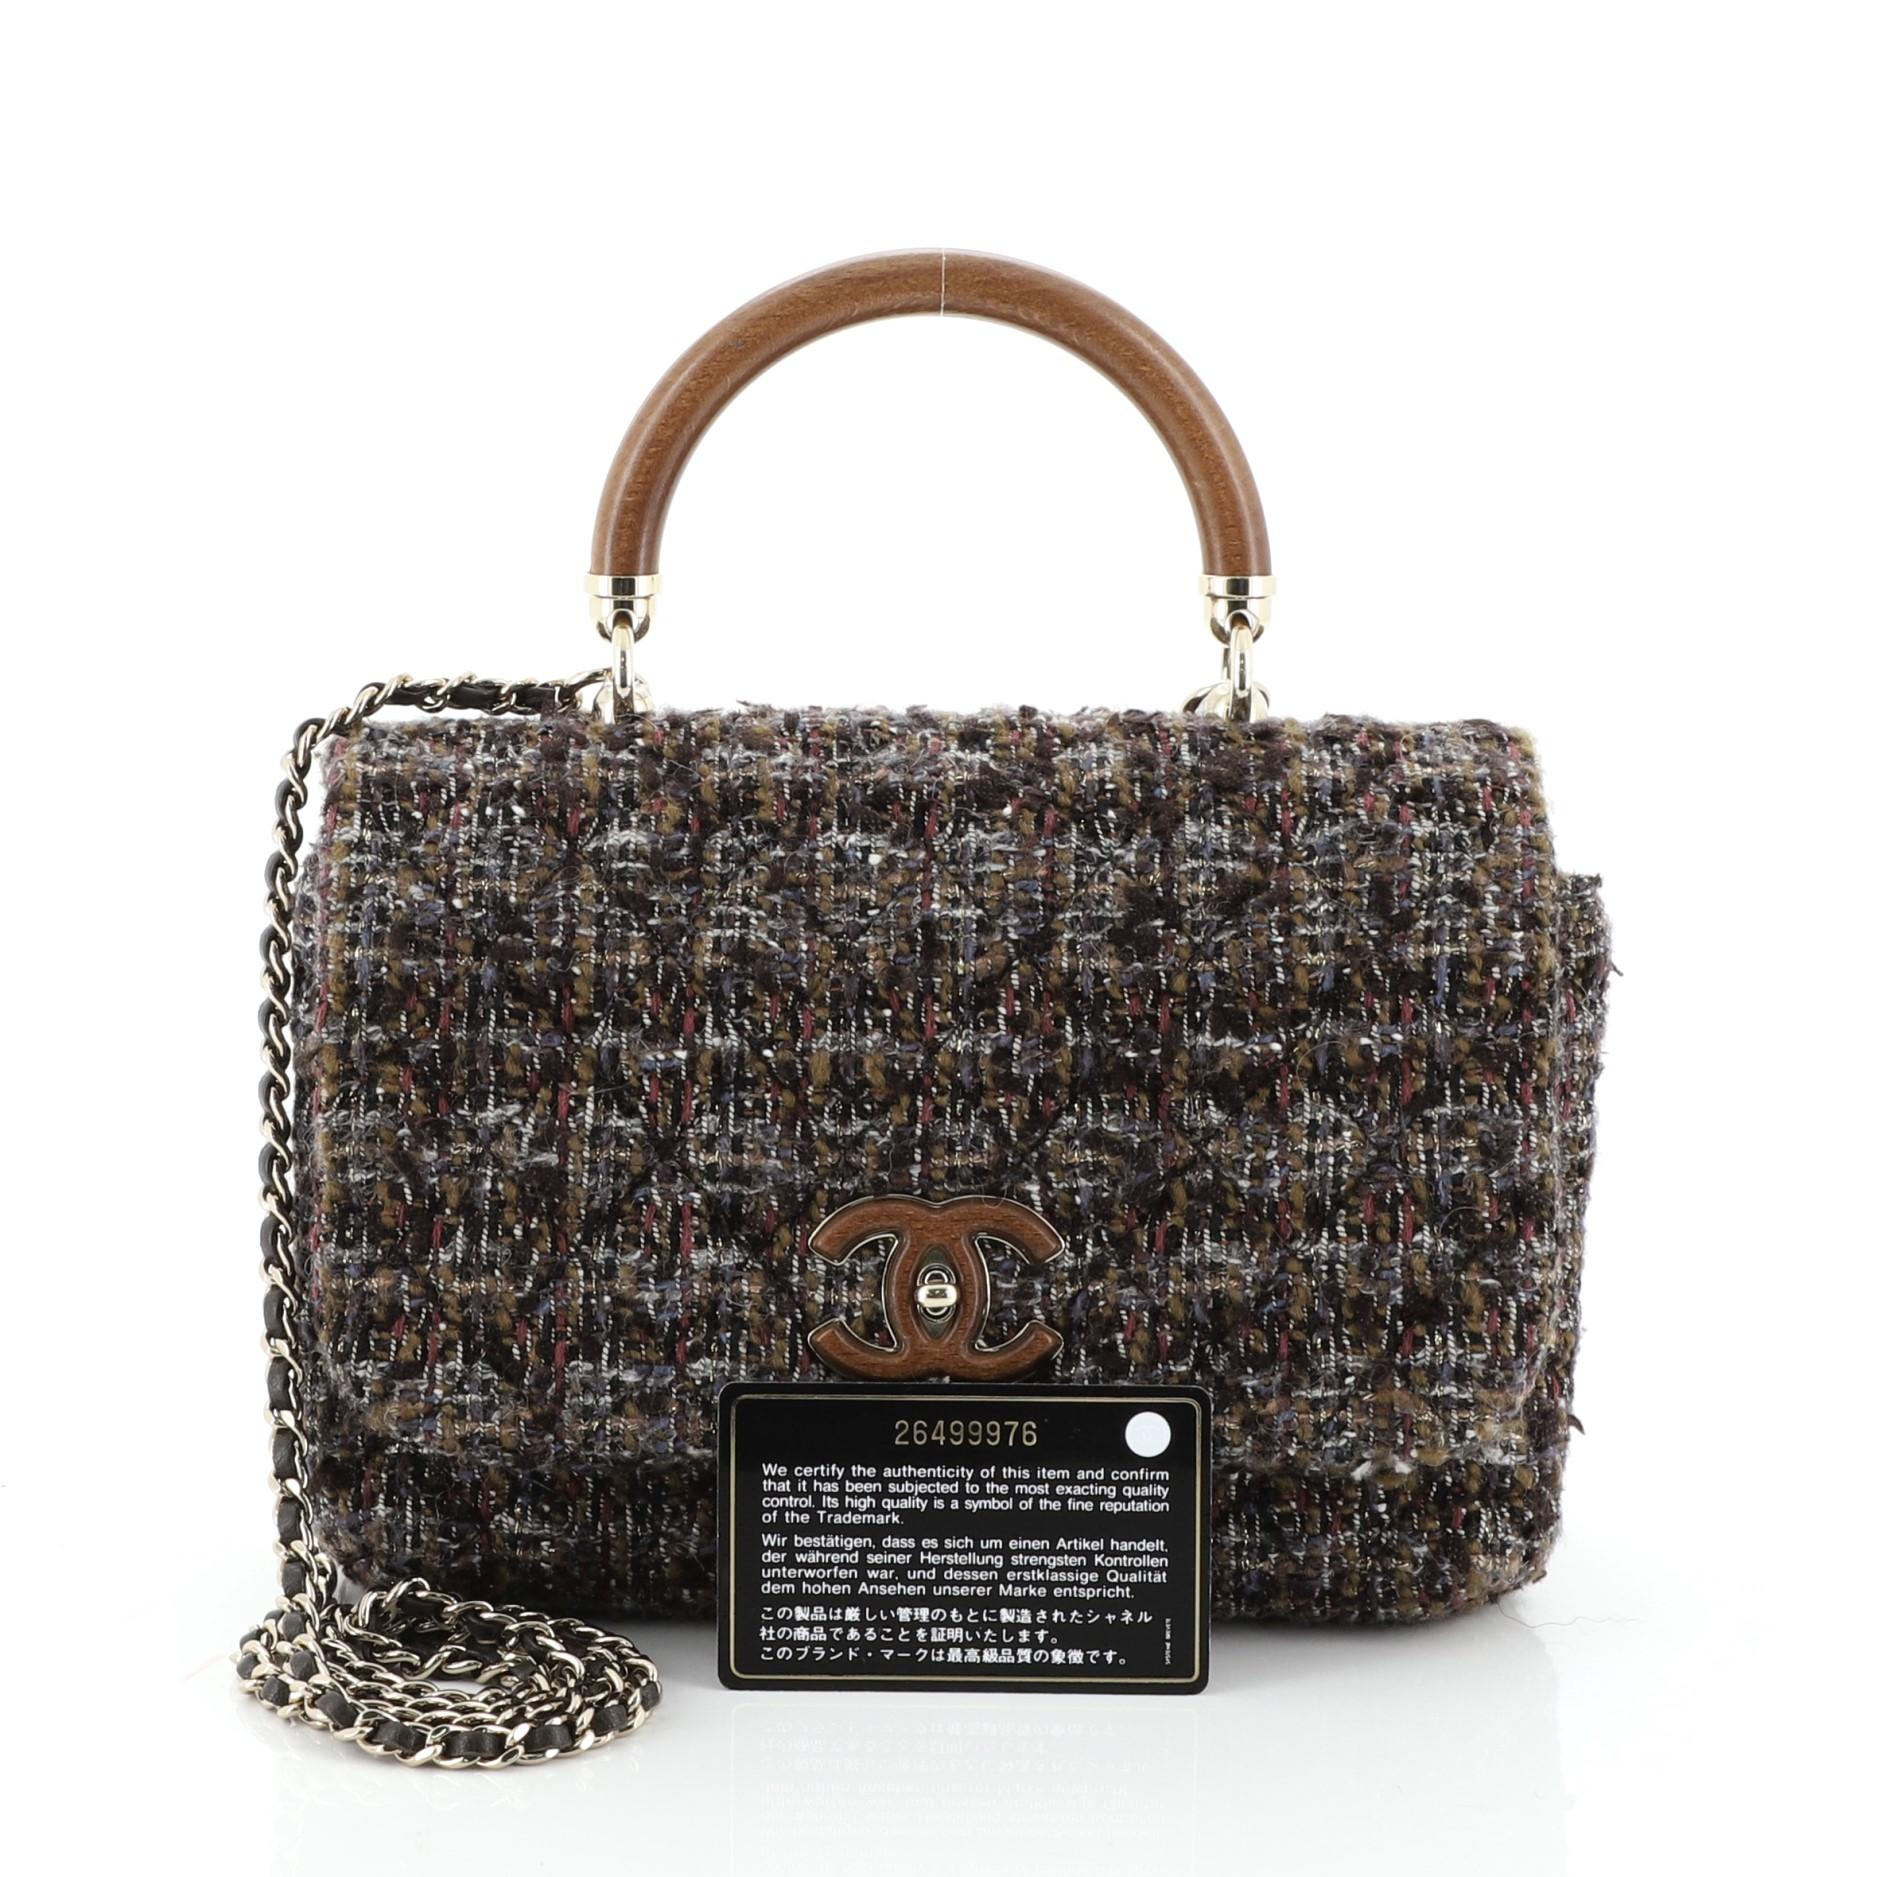 This Chanel Knock on Wood Top Handle Bag Quilted Tweed Mini, crafted in brown quilted tweed, features a wood top handle, woven-in leather chain strap and gold-tone hardware. Its turn-lock closure opens to a brown fabric interior. Hologram sticker